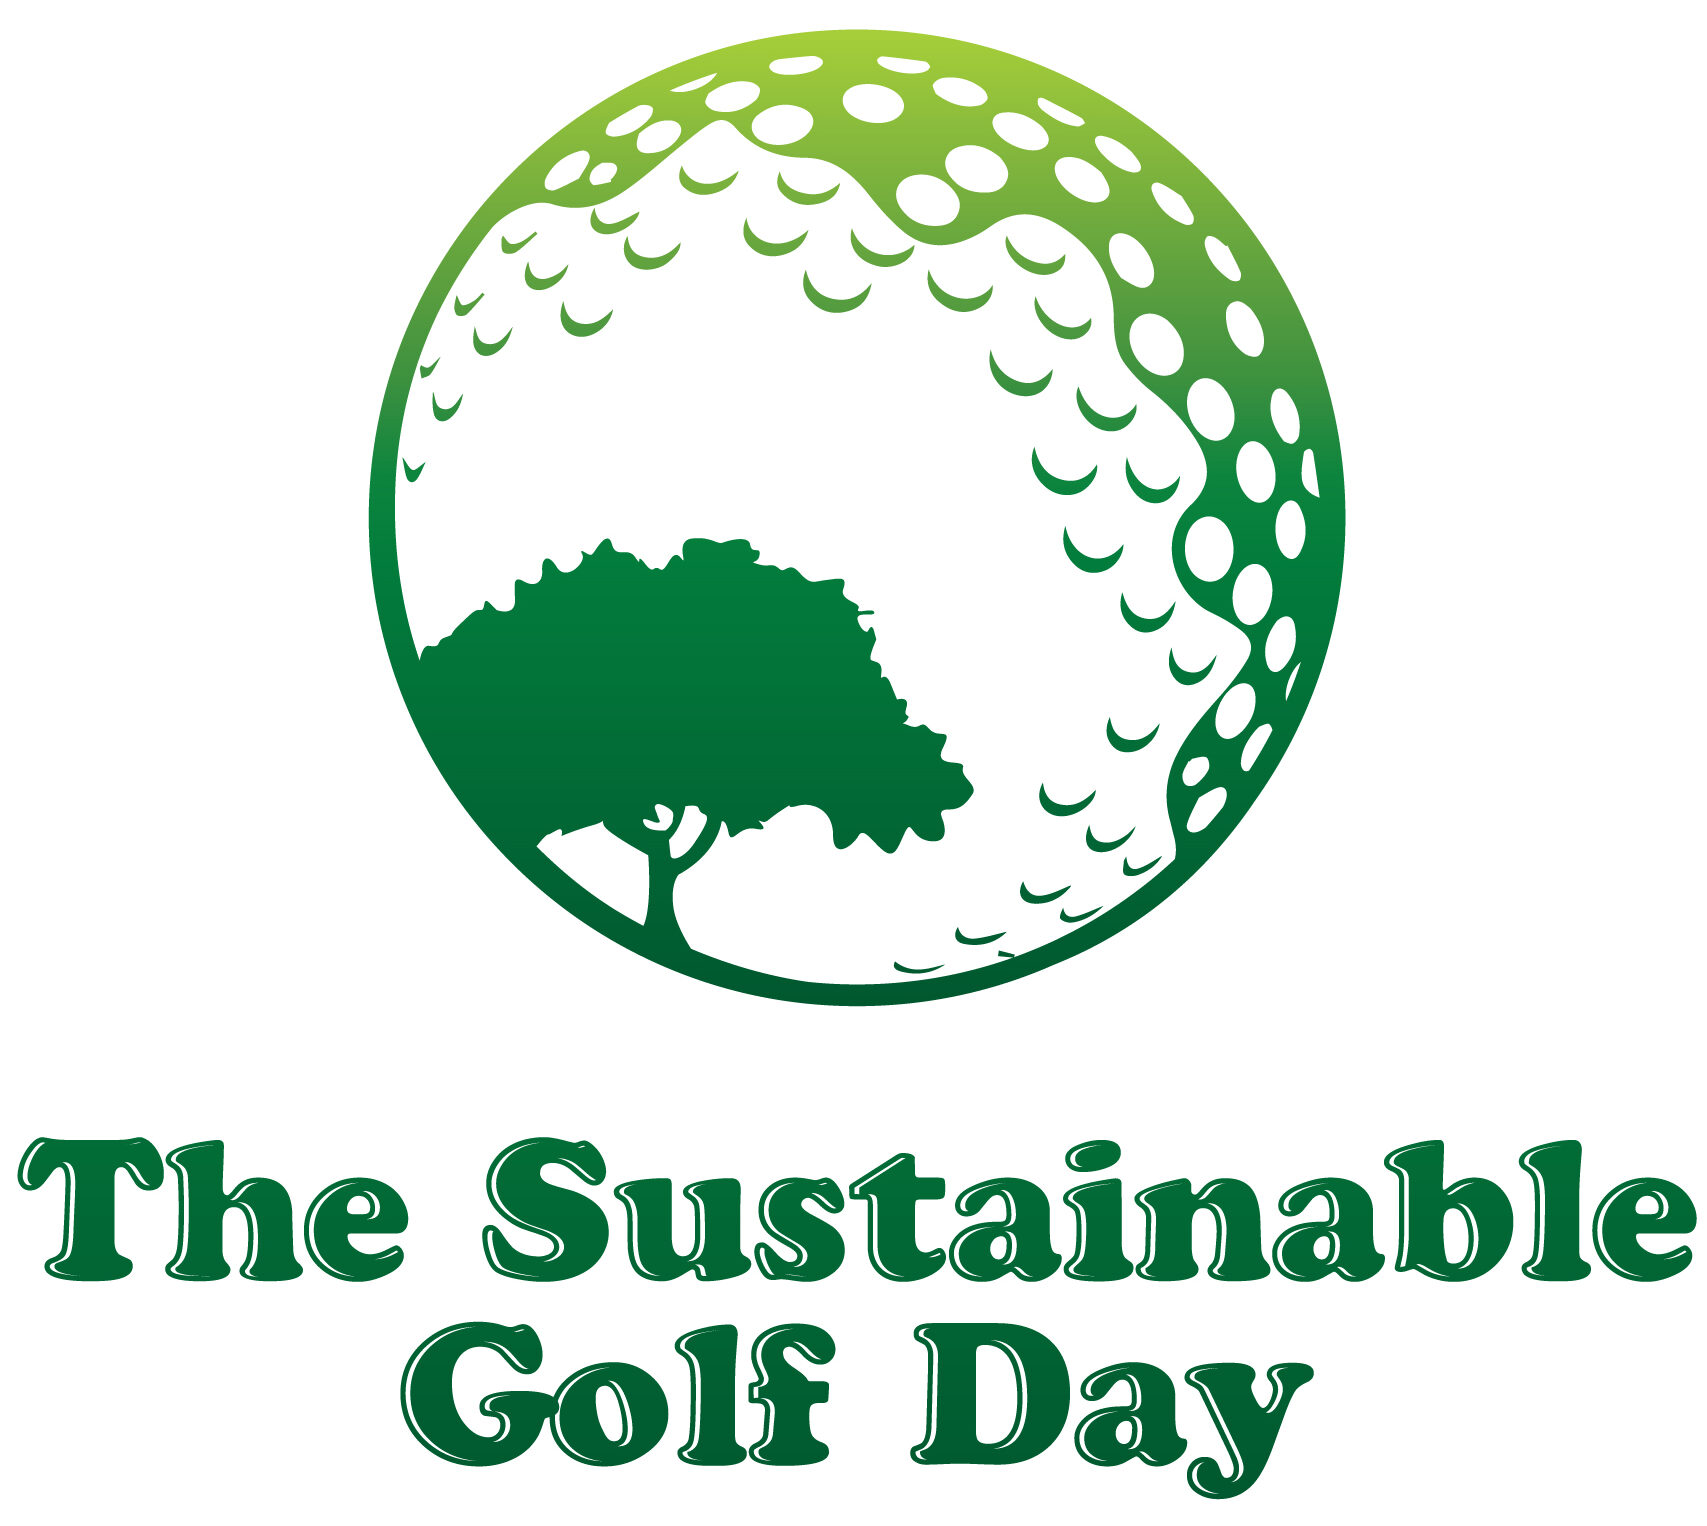 The Sustainable Golf Day